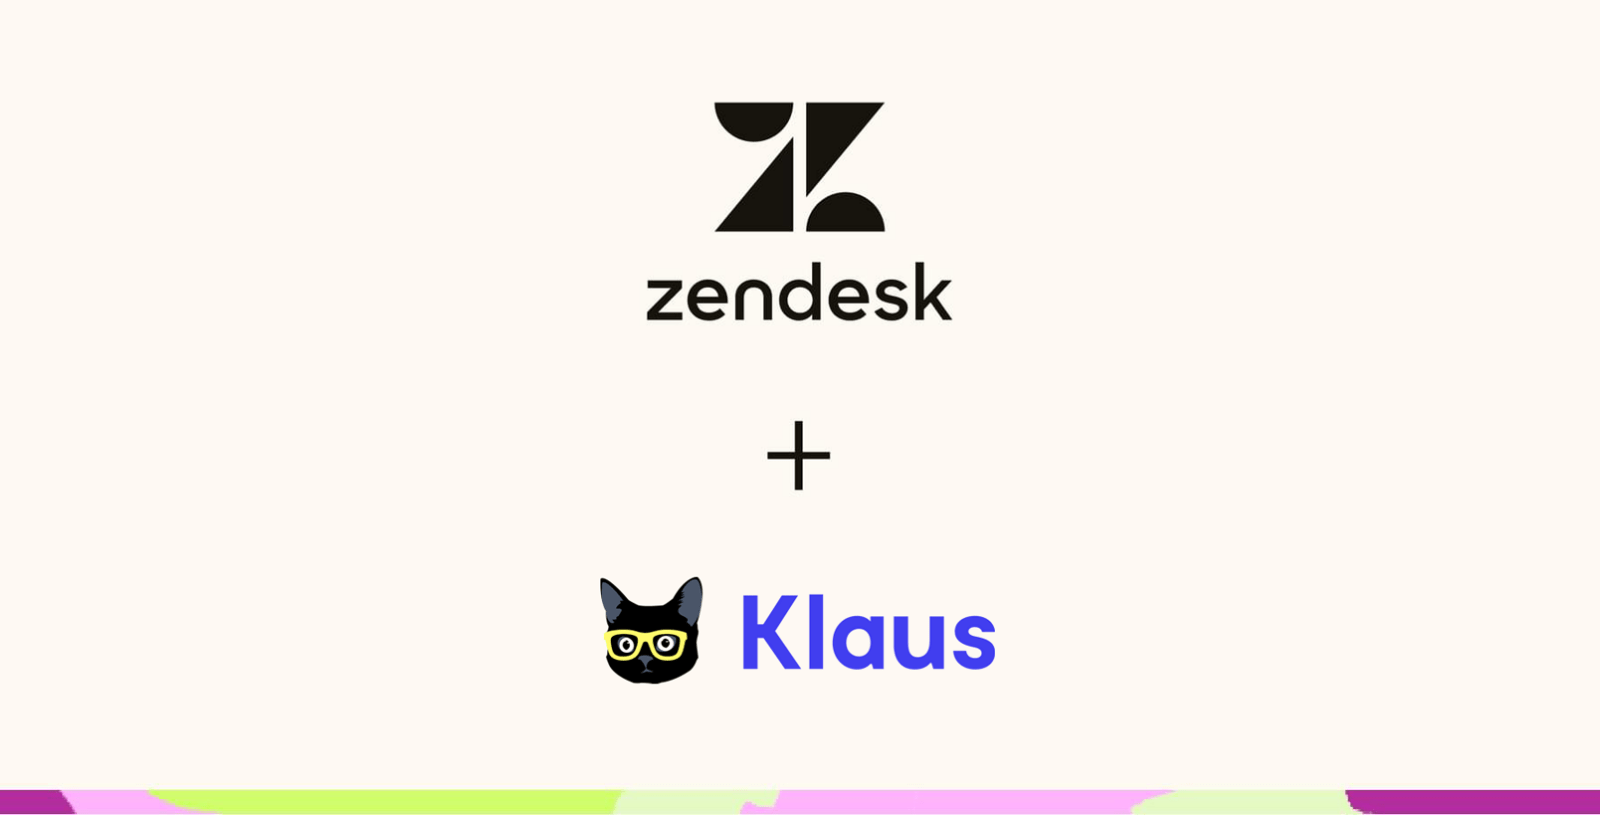 Zendesk and Klaus